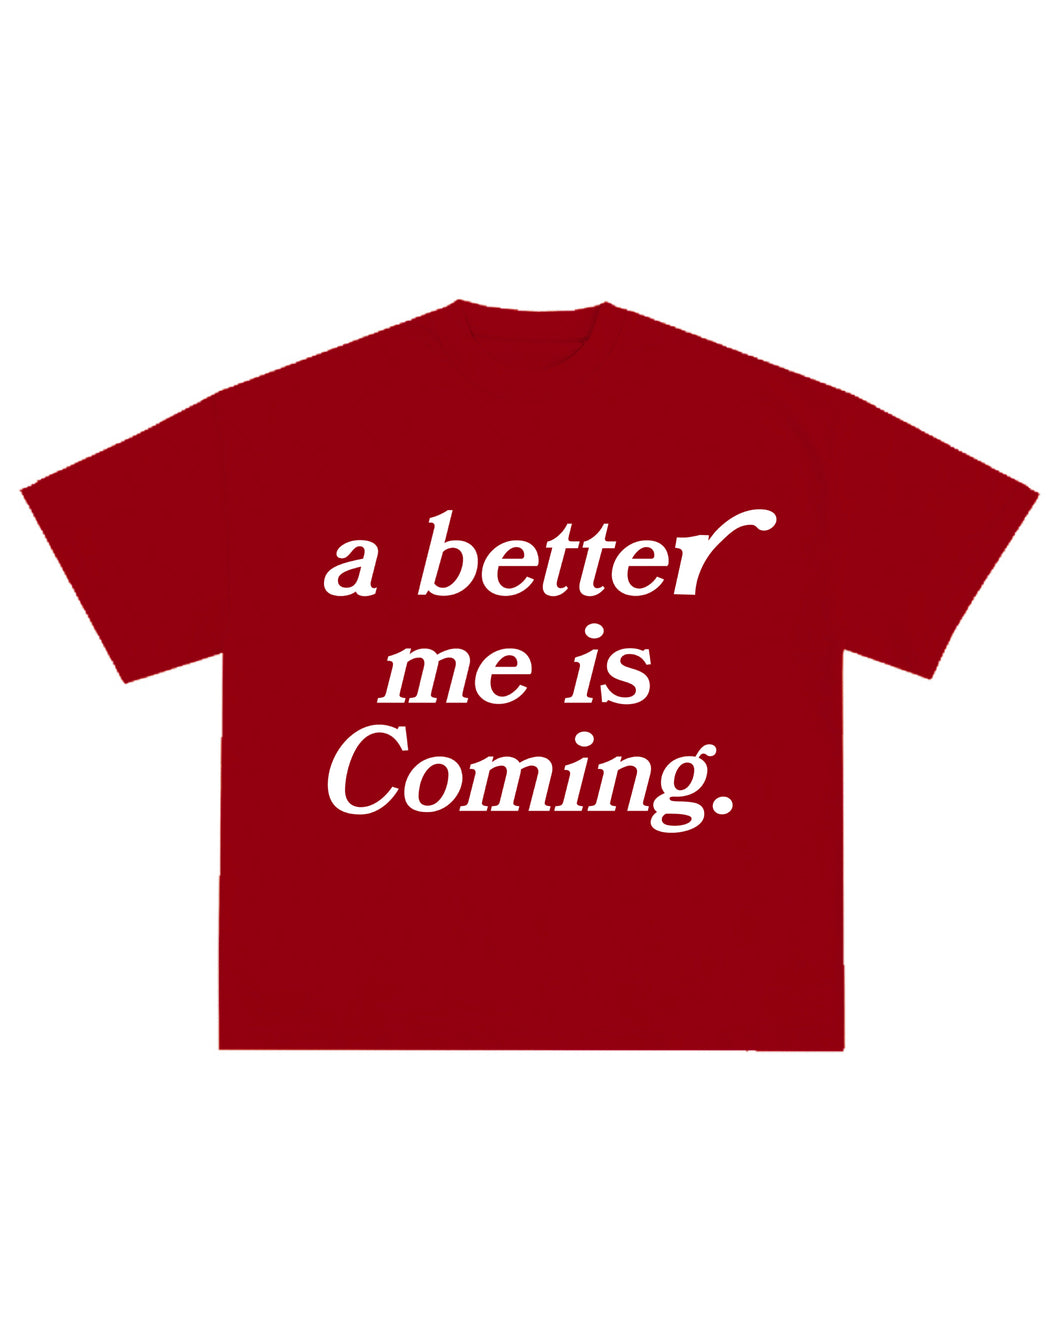 A better me is Coming - Red